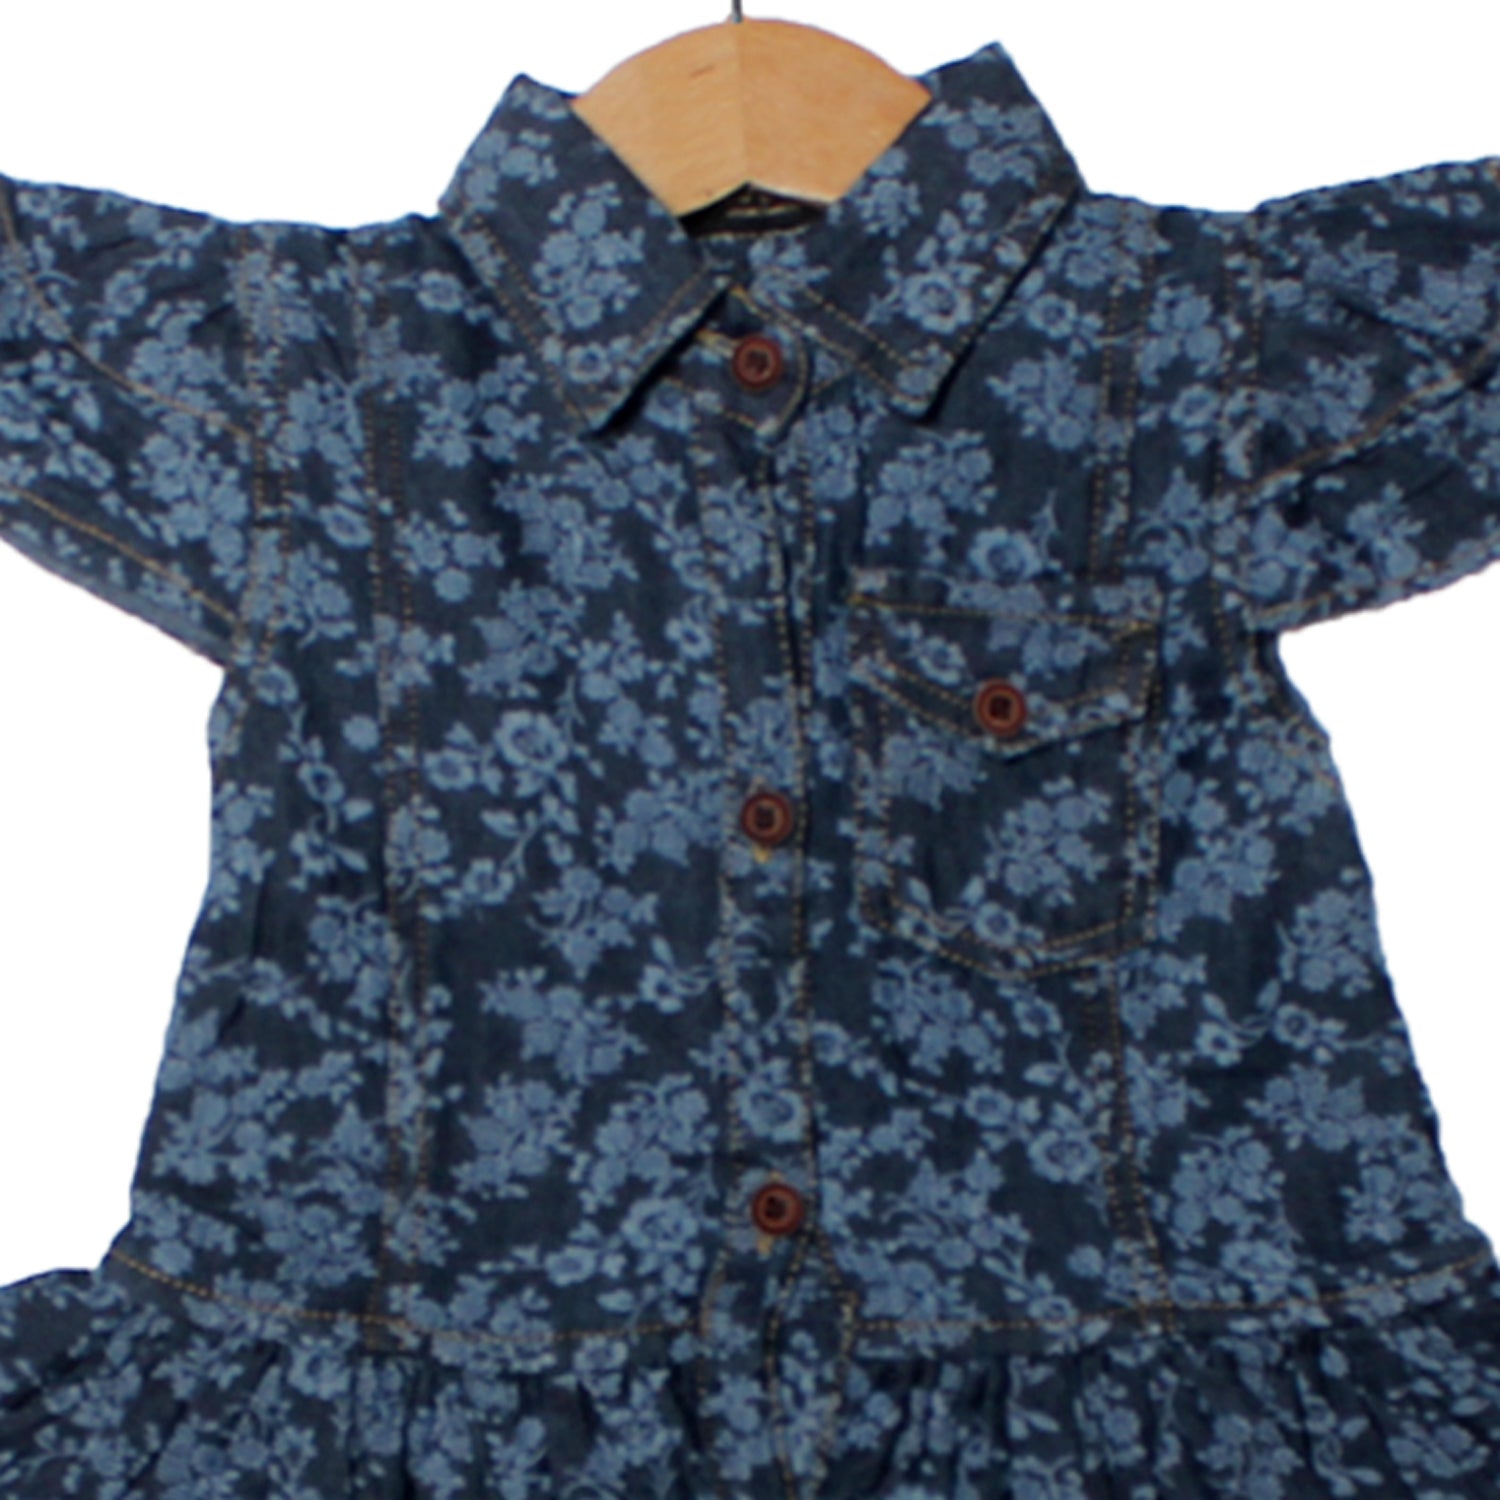 NEW DENIM BLUE FLOWERS PRINTED FROCK FOR GIRLS